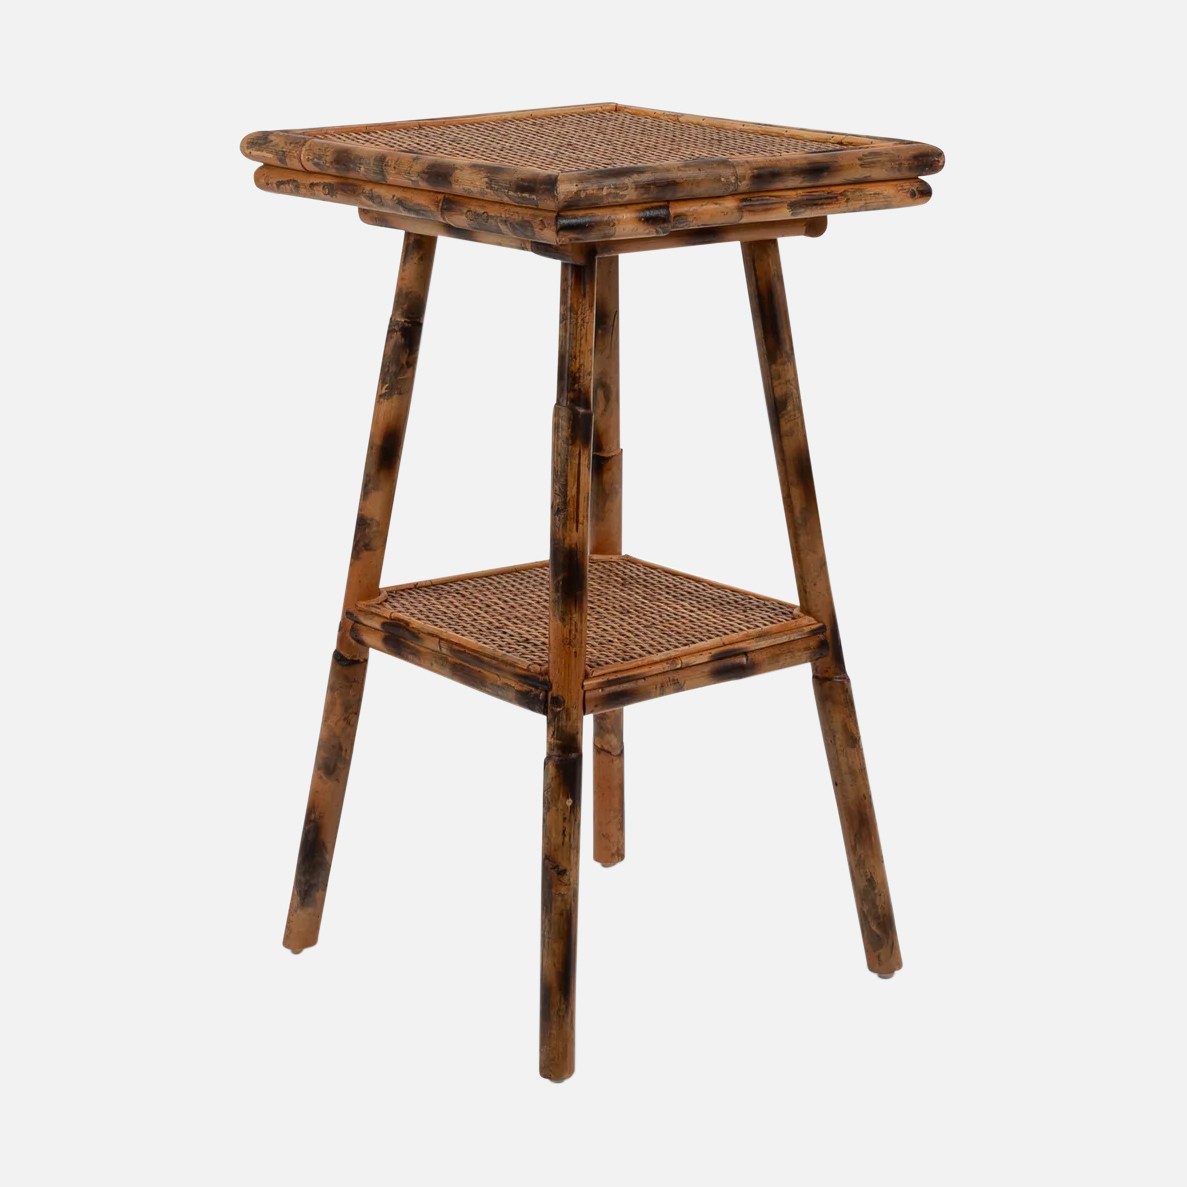 a wooden table with a shelf on top of it